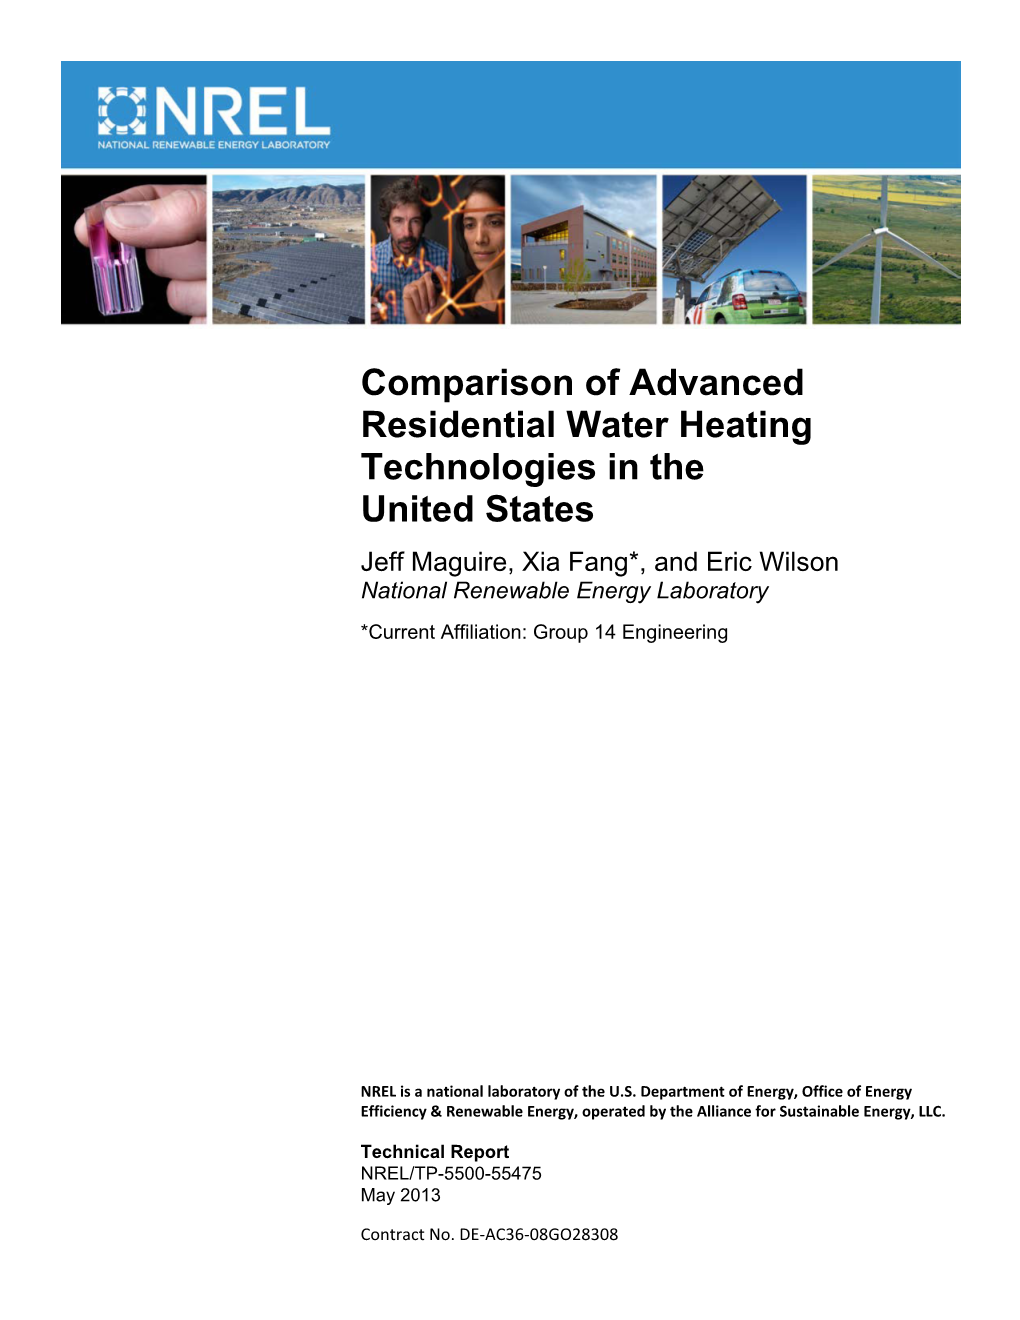 Comparison of Advanced Residential Water Heating Technologies in The